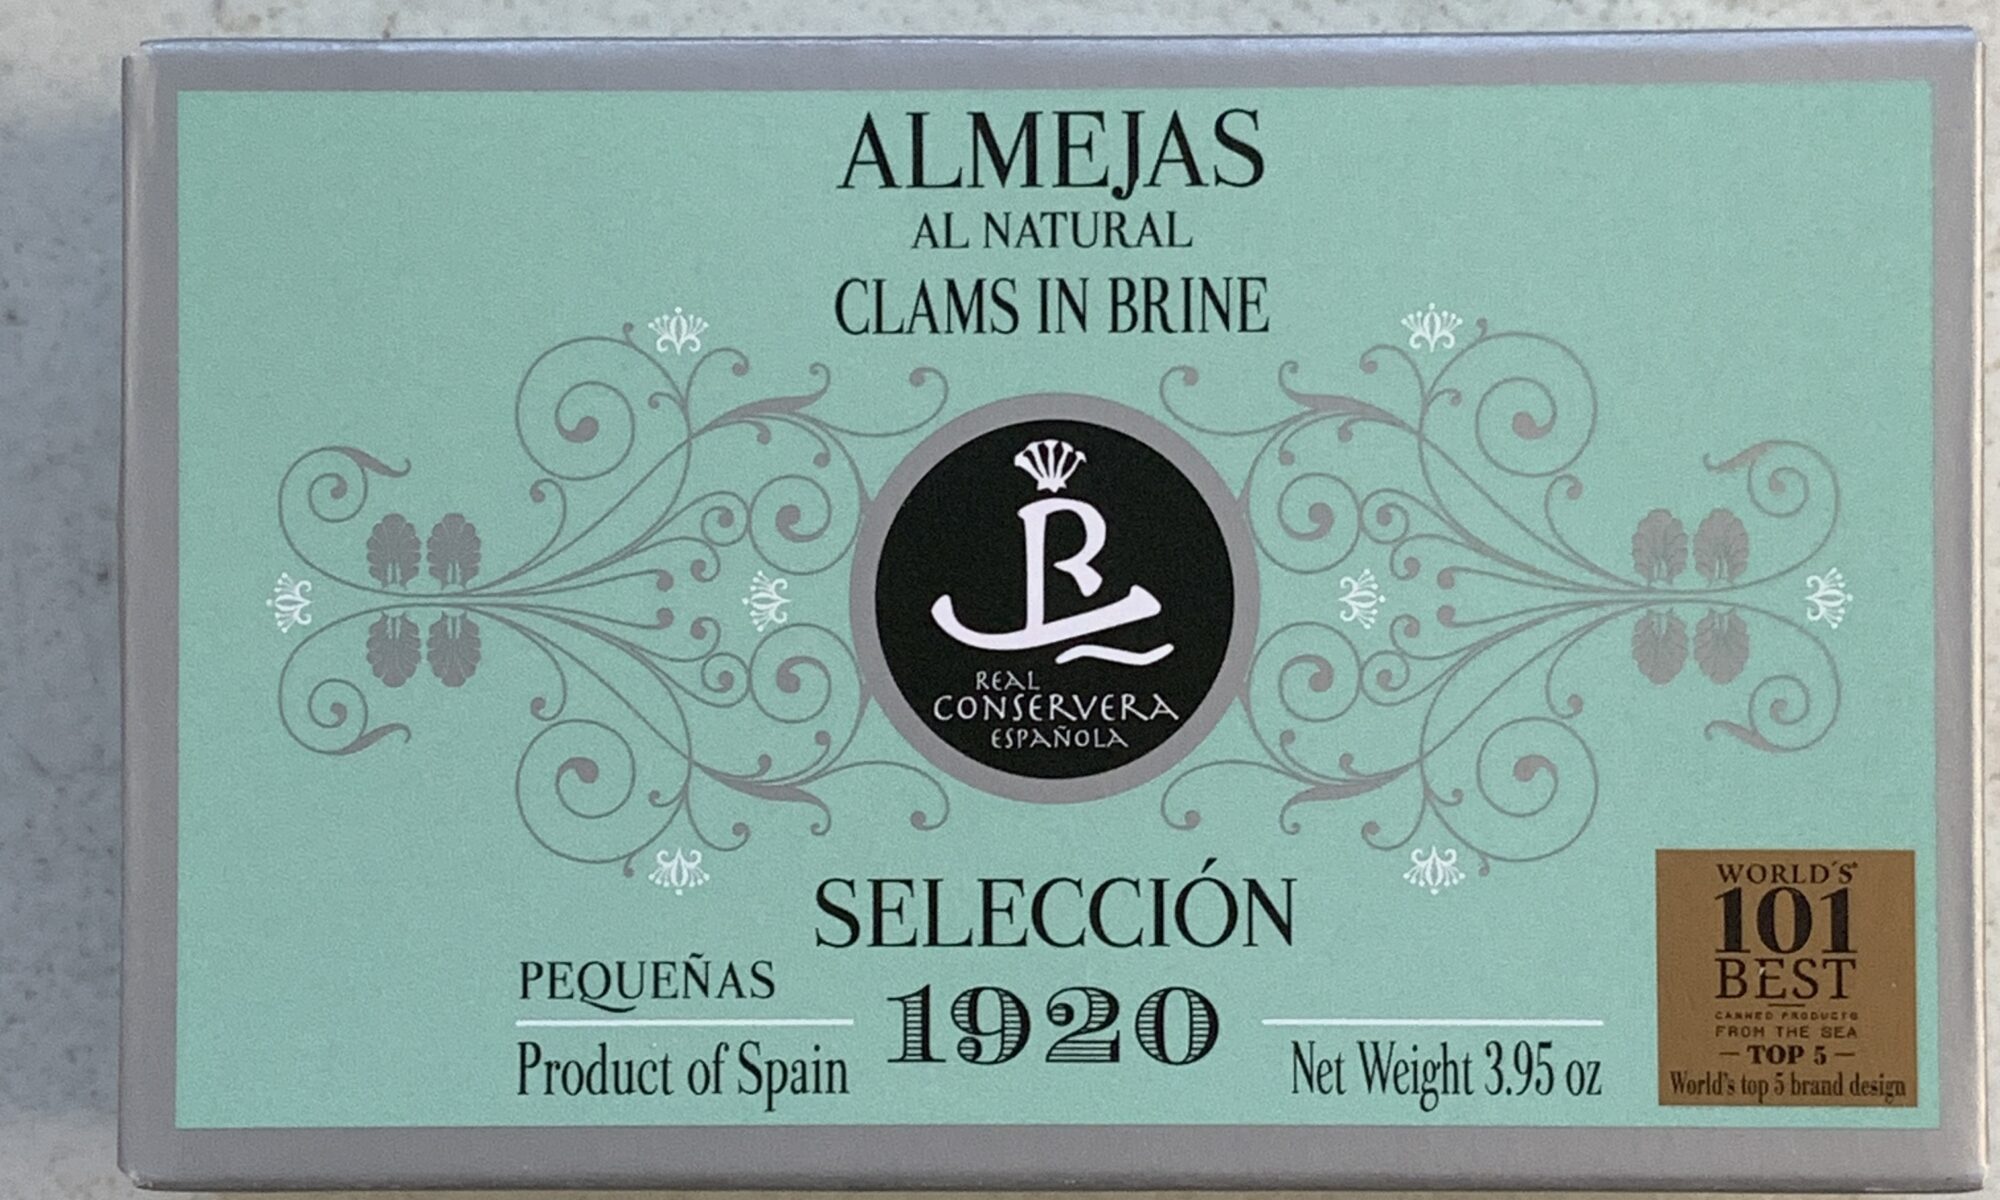 Image of the front of a package of Real Conservera Selección 1920 Clams in Brine